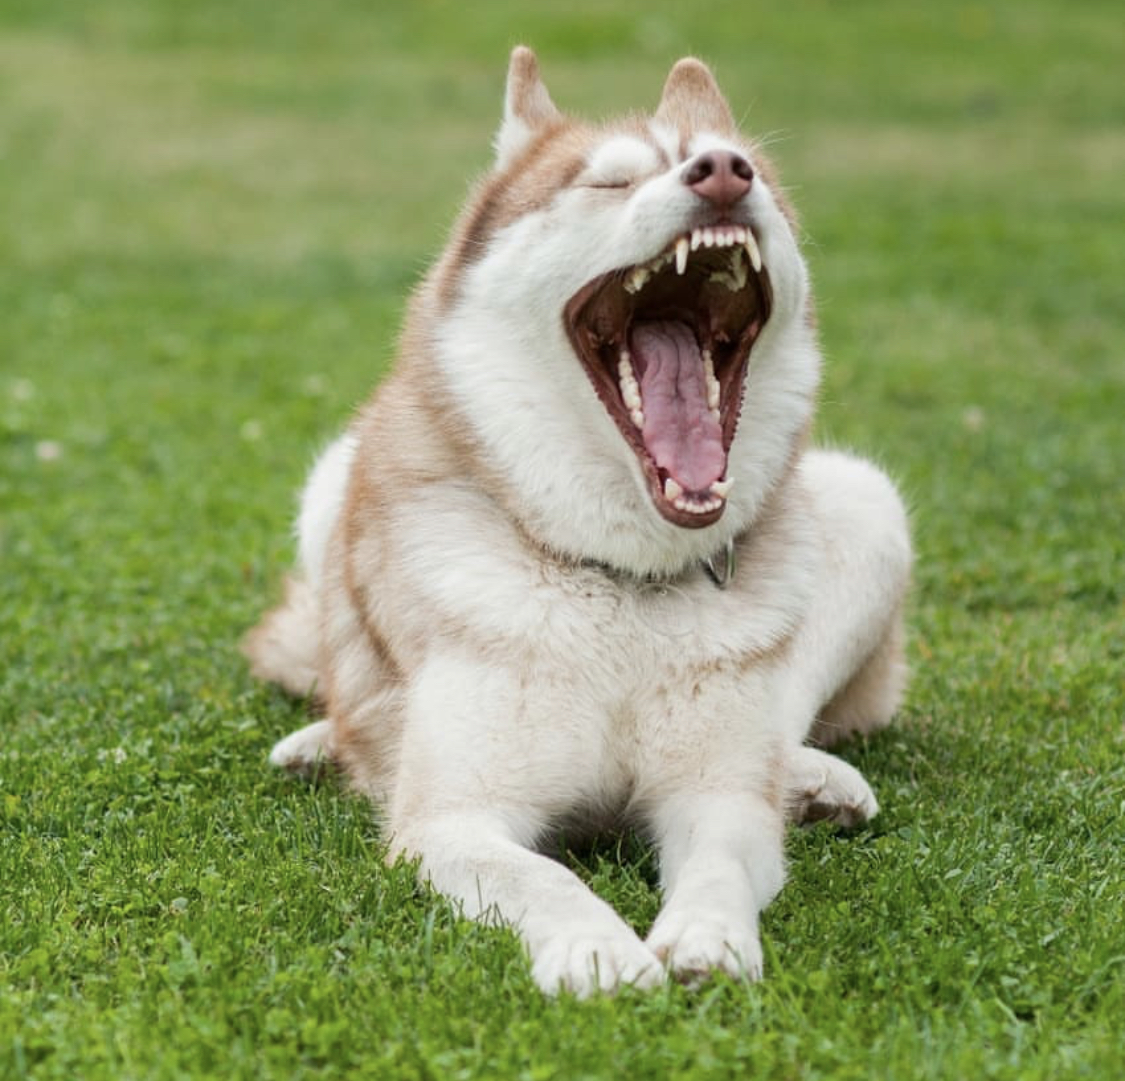 A Husky lying on down on the grass while yawning and showing its wide mouth